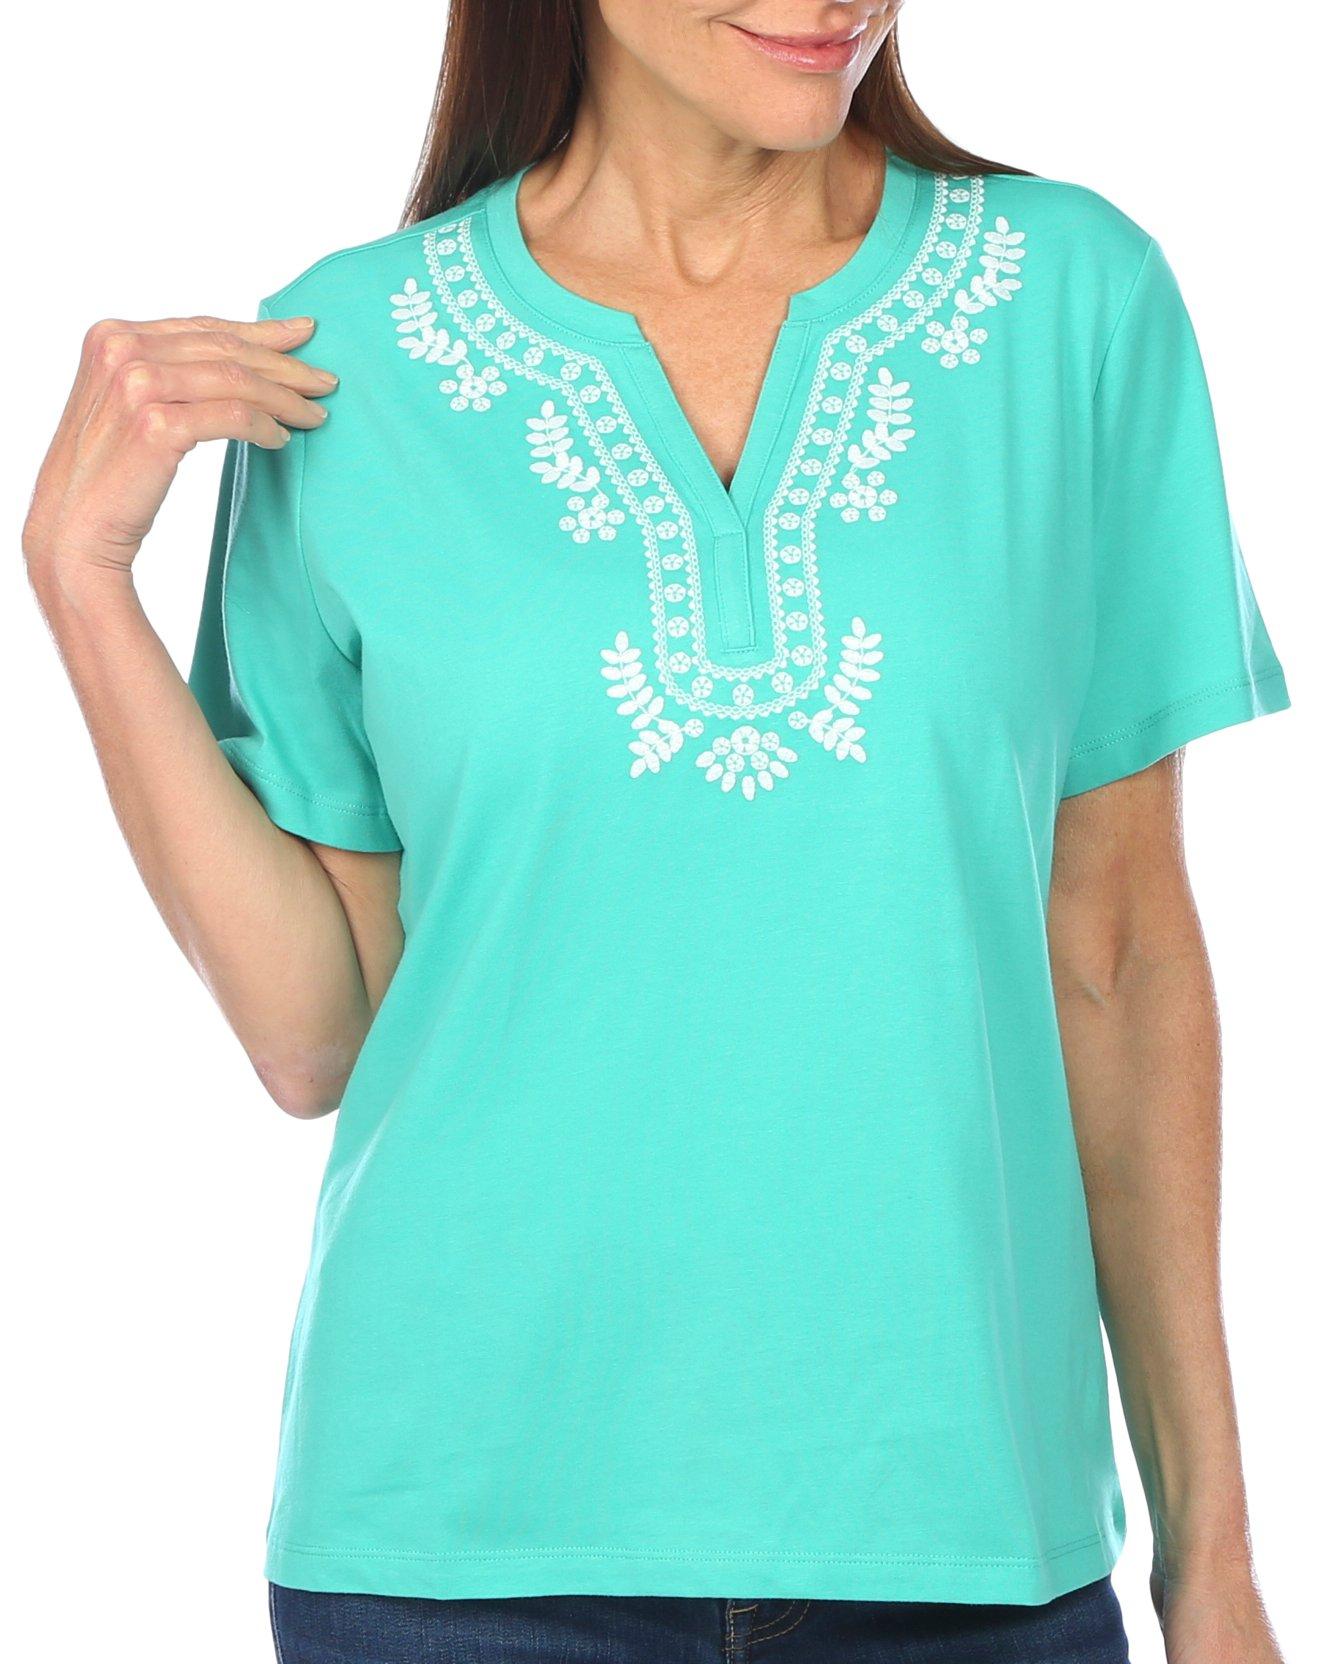 Coral Bay Petite Embroidery Notch Neckline Short Sleeve Tee